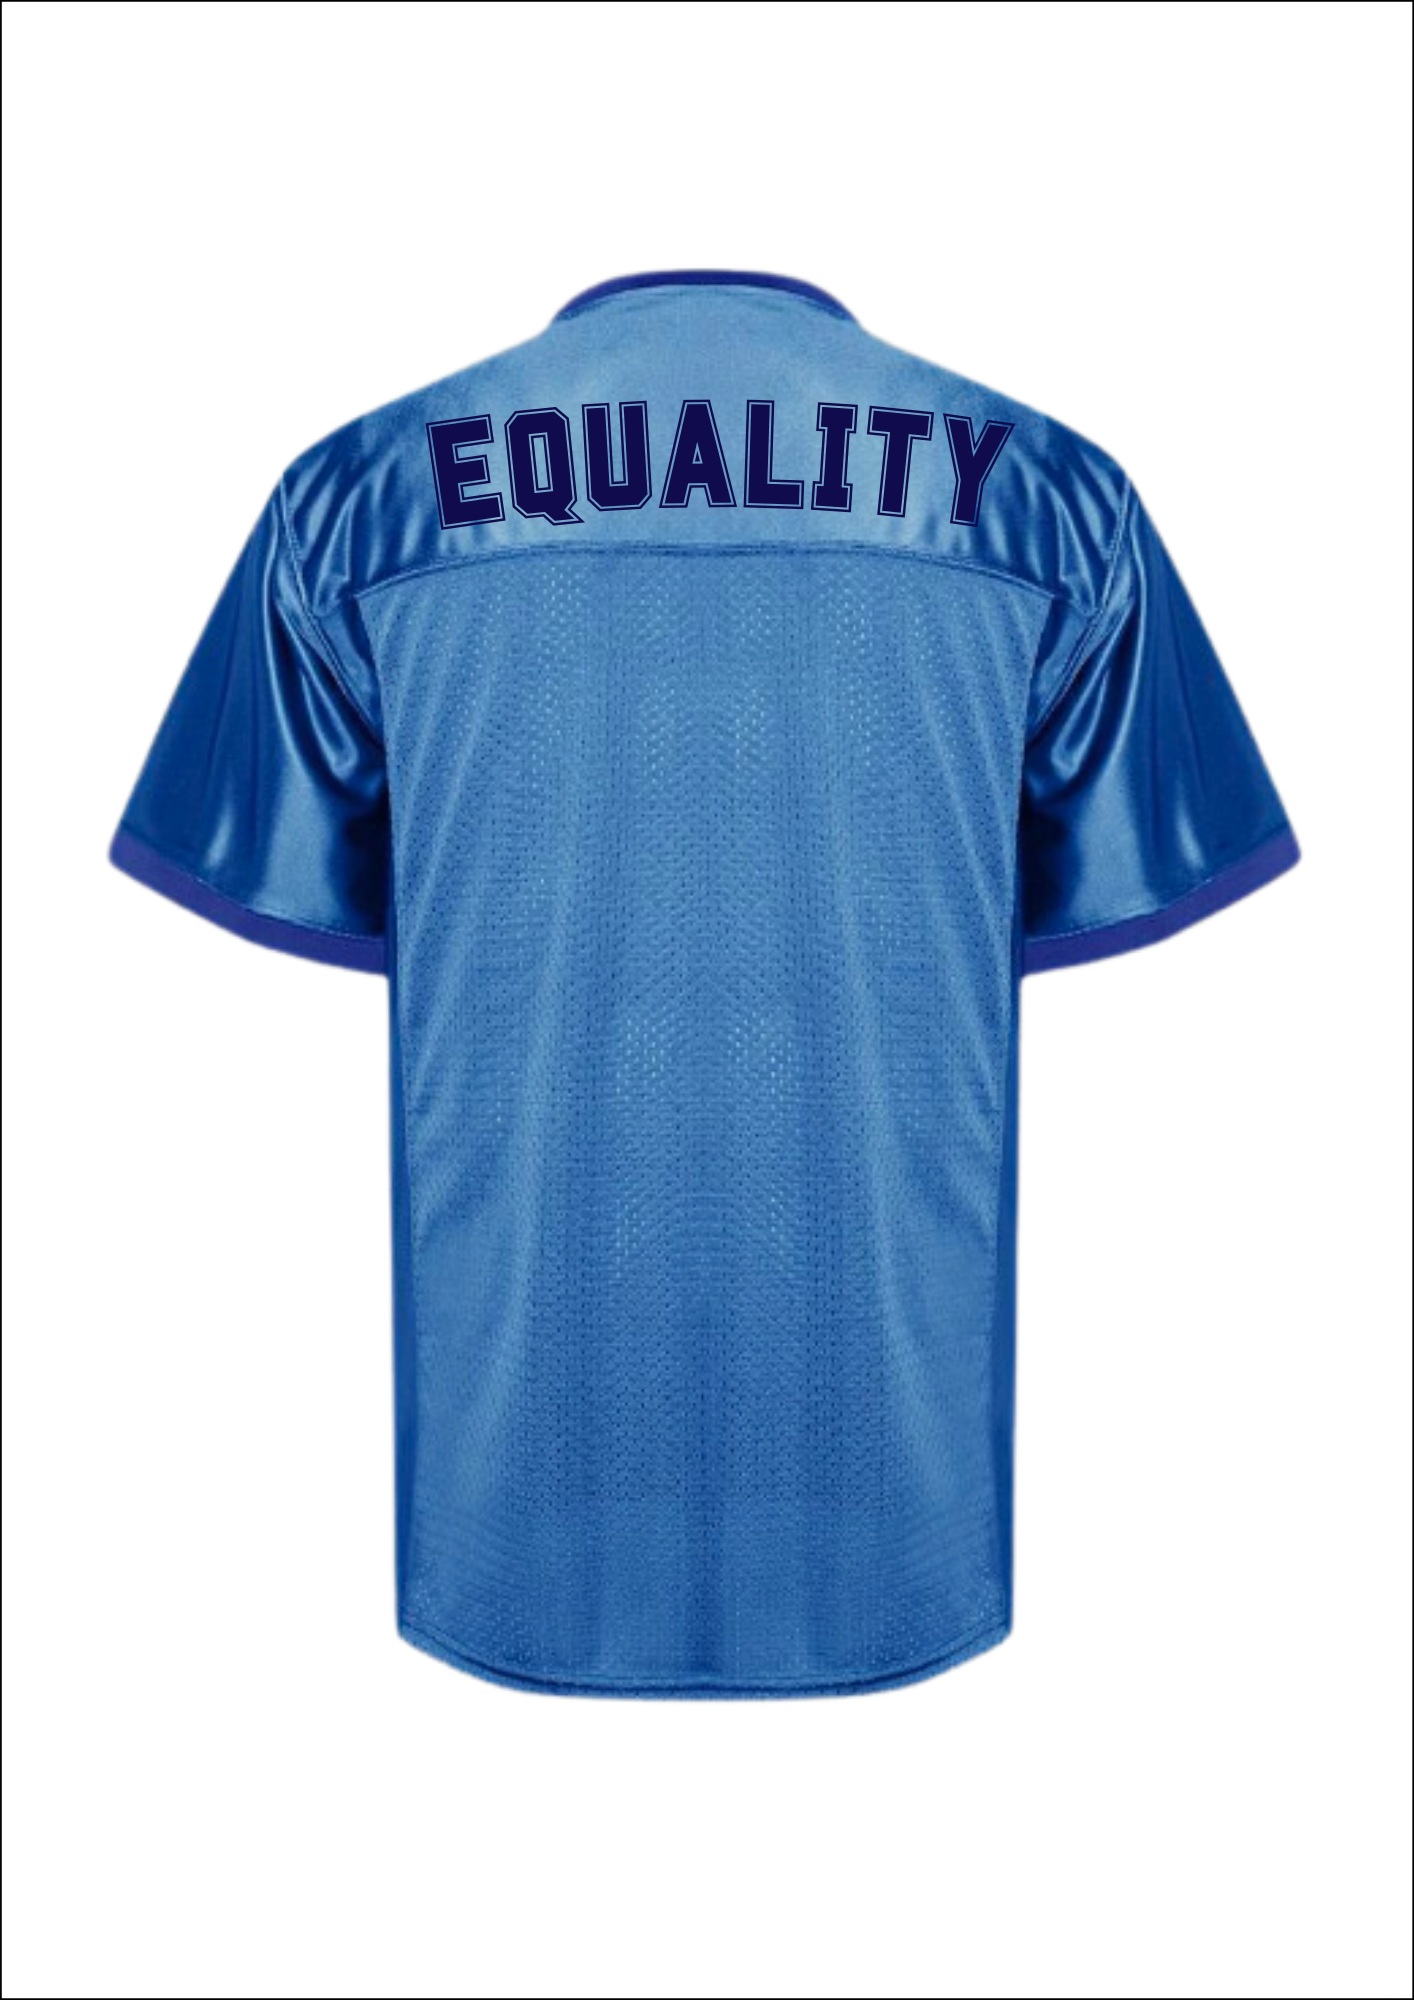 Football jersey EQUALITY blue